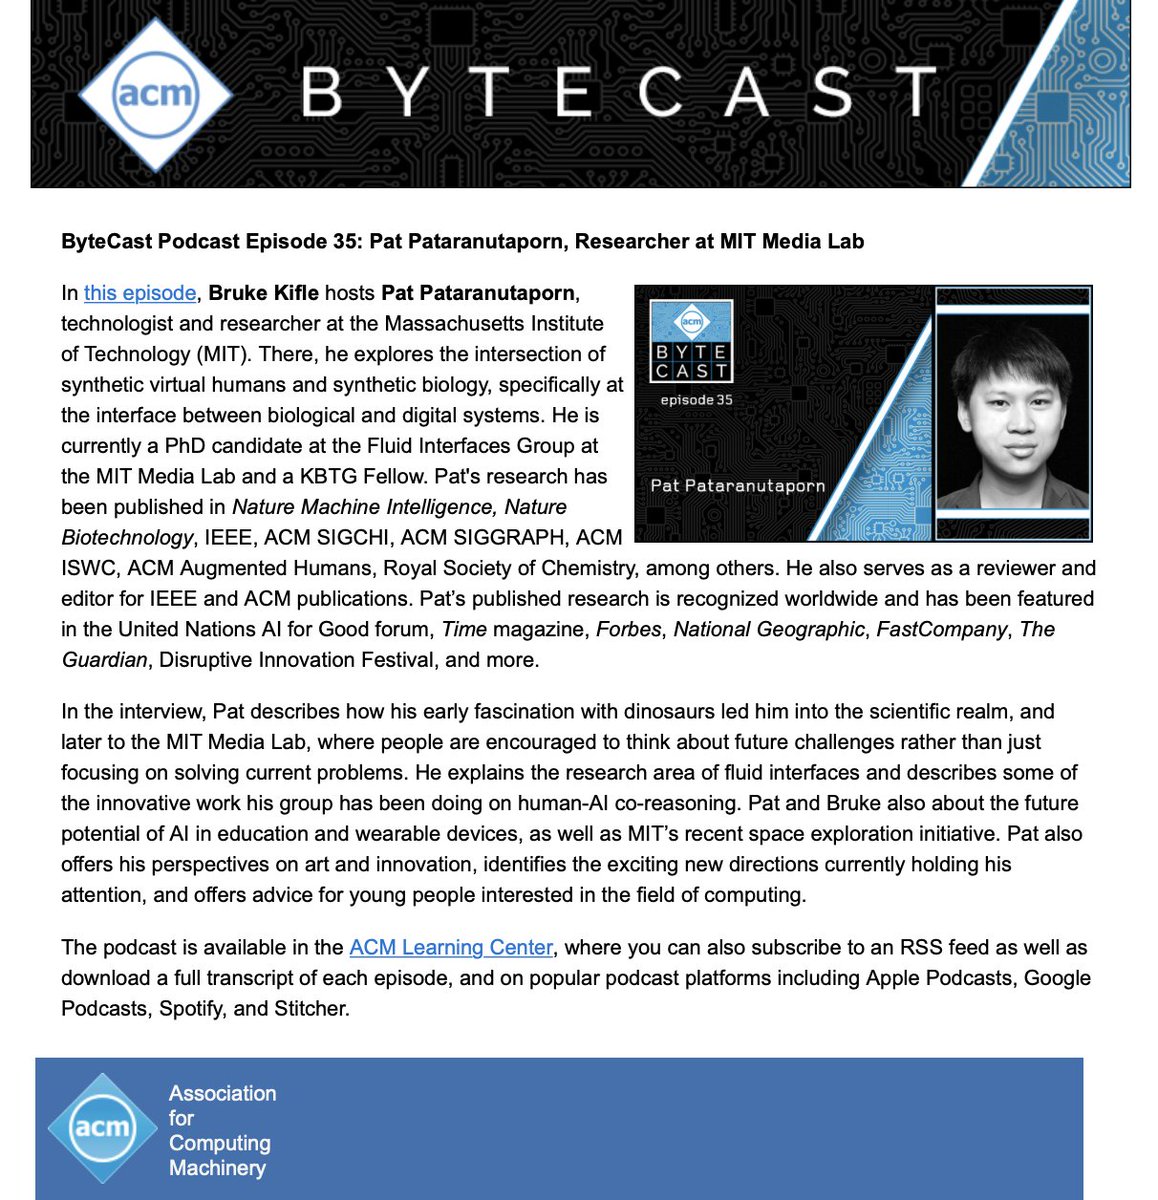 Thank you @acmeducation  (Association for Computing Machinery) for inviting me for the ByteCast Podcast. Thank you Stephen Ibaraki and Bruke Kifle for making this happen: 
learning.acm.org/bytecast/ep35-…
media.mit.edu/posts/acm-byte…

#ACMByteCast @medialab  @FluidInterfaces